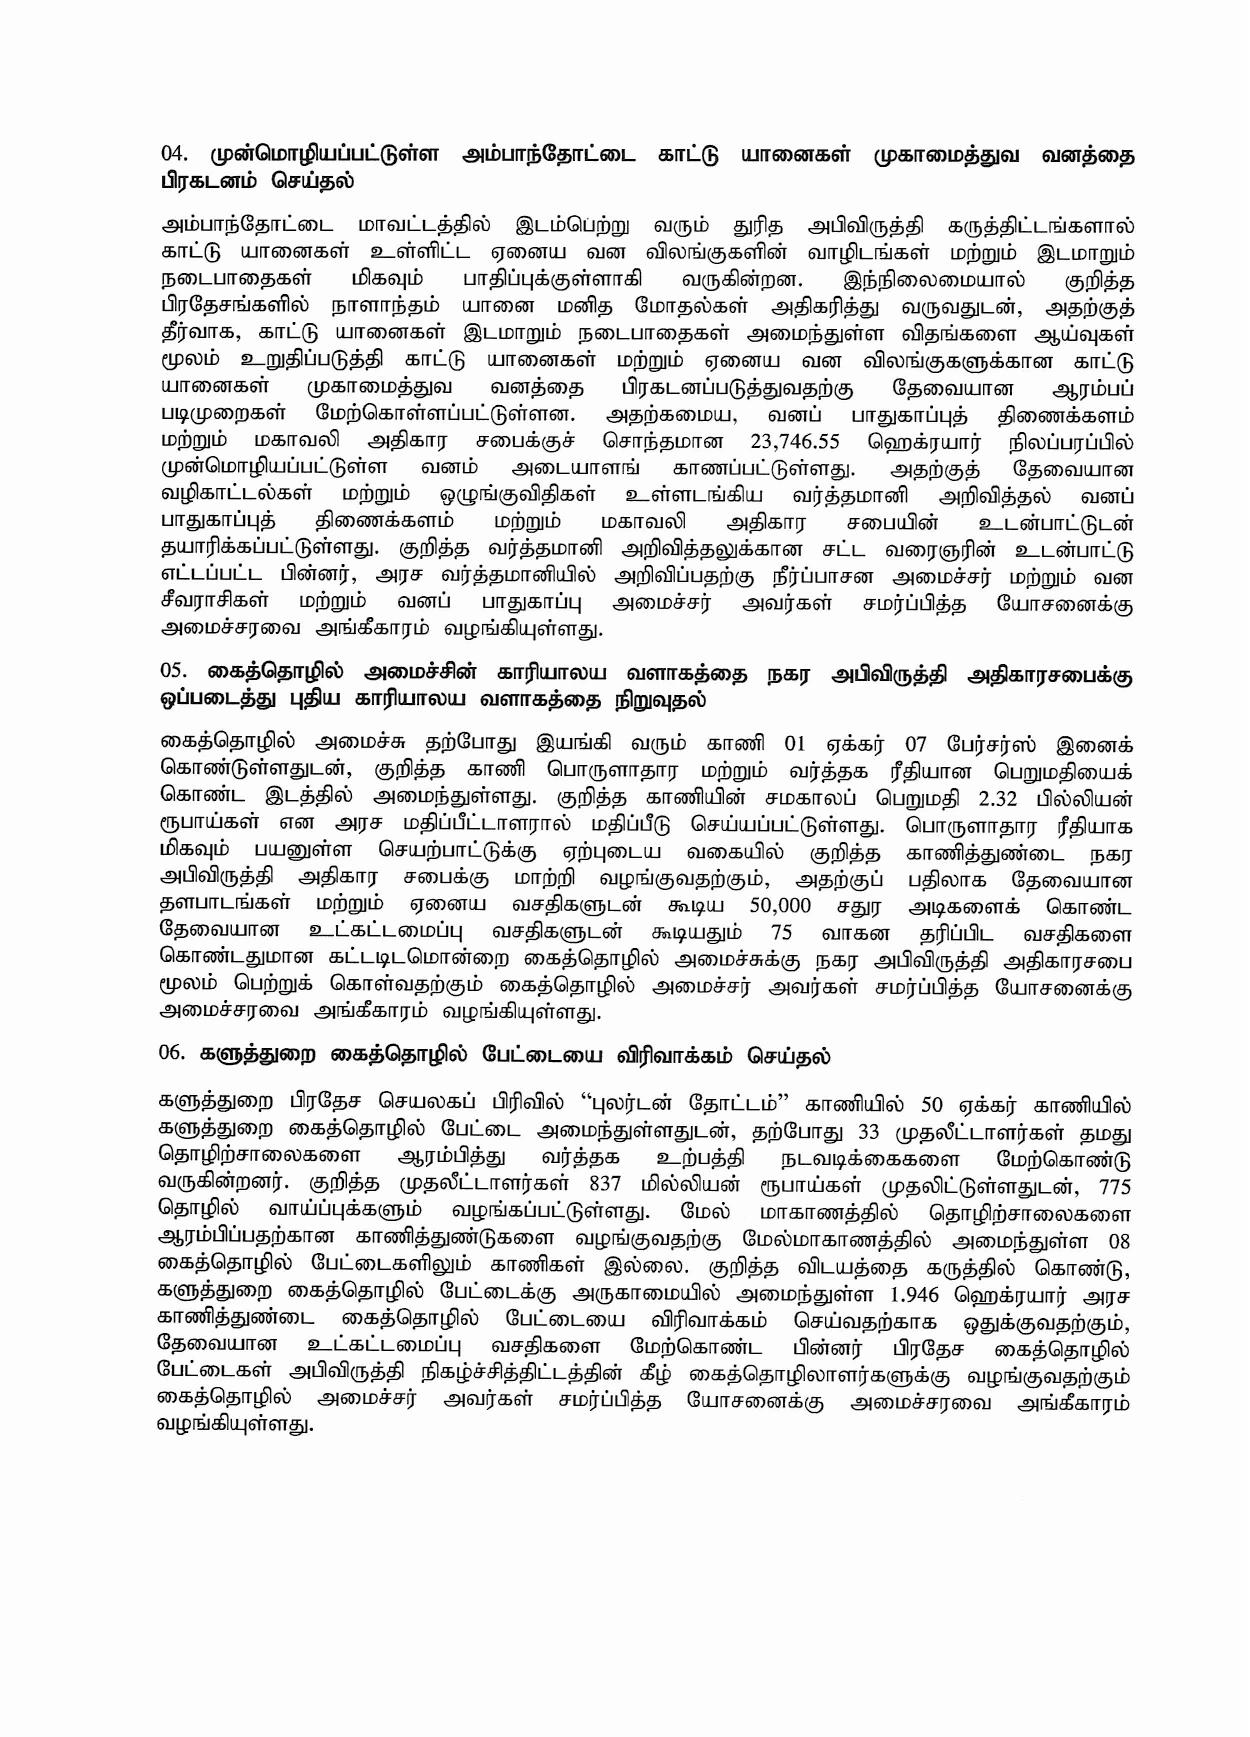 Cabinet Decision on 22.02.2021 Tamil page 002